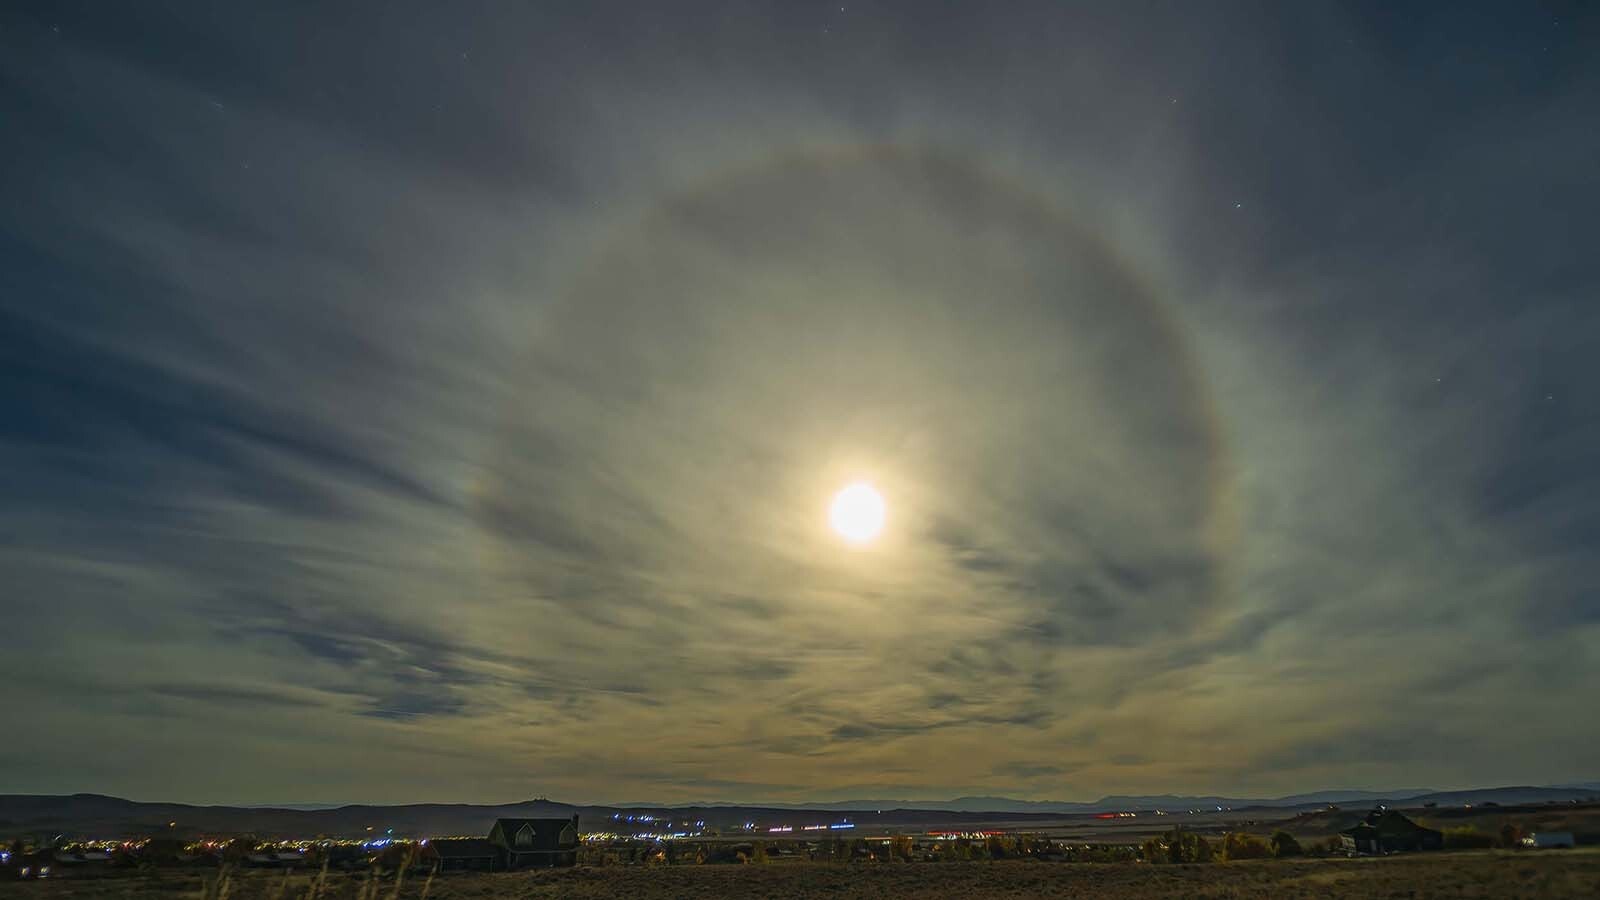 A halo emanates from the supermoon over Sublette County in this image captured by Wyoming photographer Dave Bell.